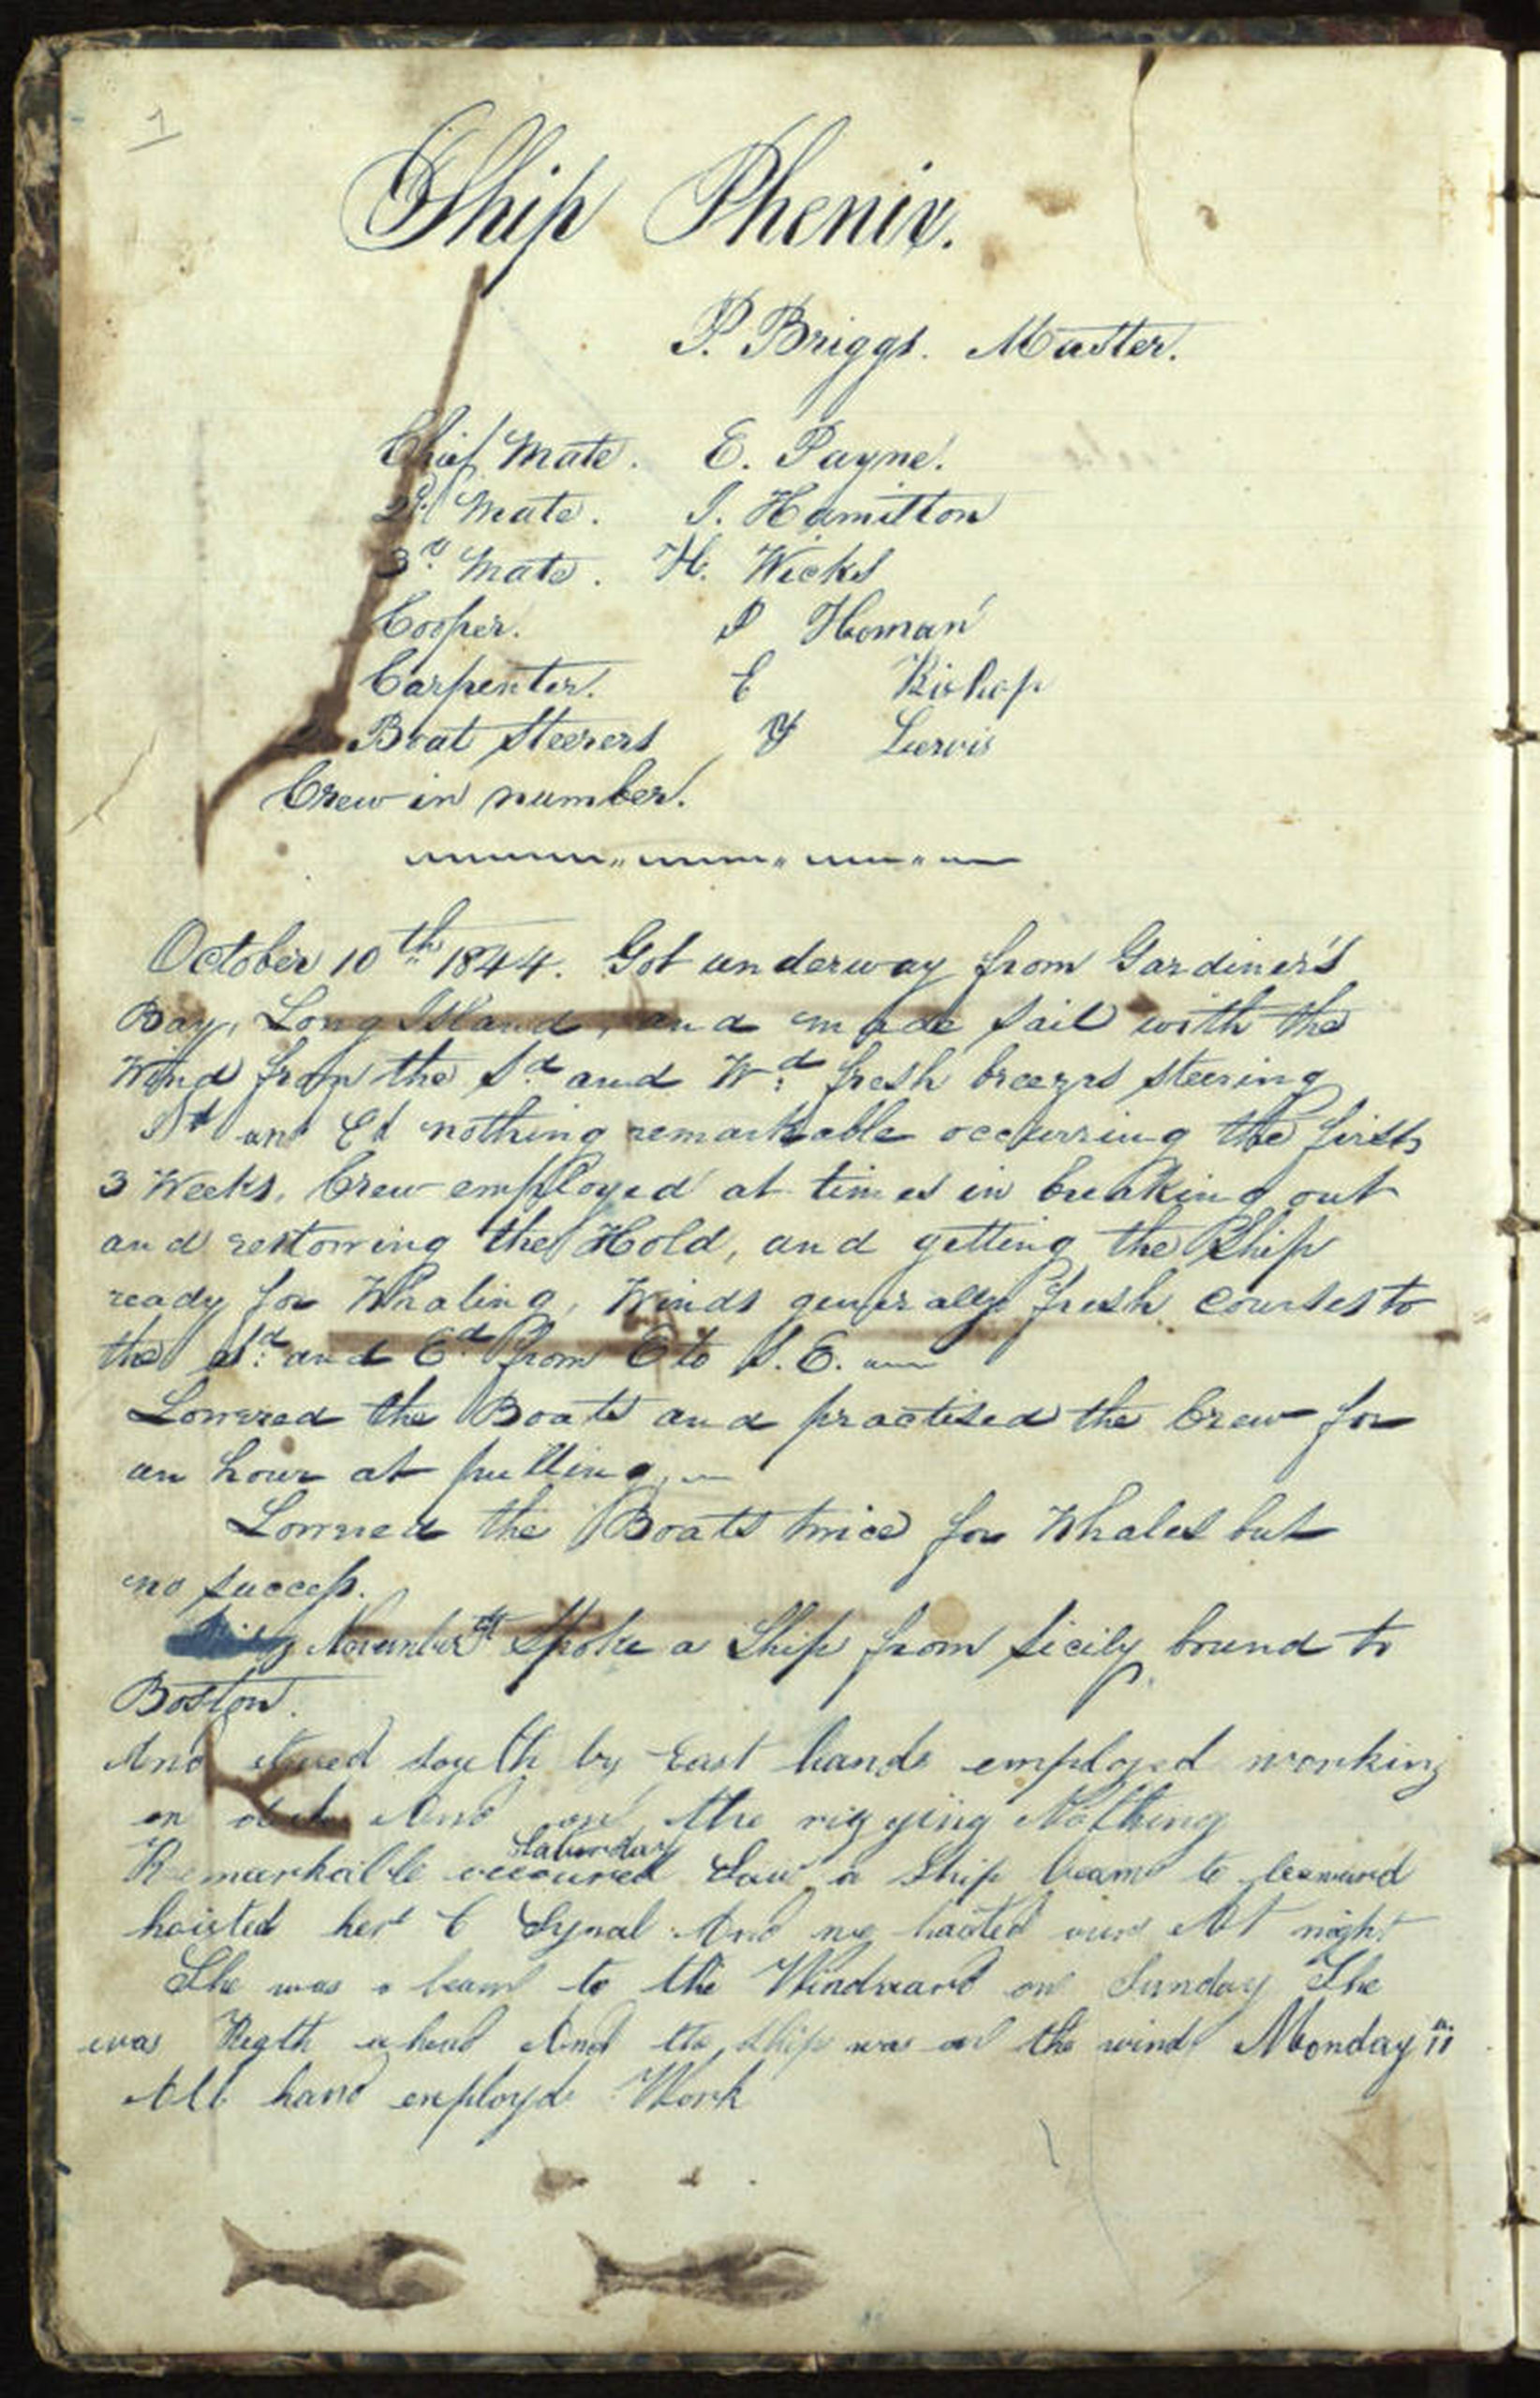 Pages from the whaling ship Phenix, on a voyage from Sag Harbor to the Northwest Coast, 10 October 1844 to 5 June 1847 (dates contained in this journal are 10 October 1845 - 4 July 1846, 10 March 1847 - 13 March 1847); owned by Cook & Green, commanded by Captain Samuel Percival Briggs. Journal abruptly ends, briefly picked up again for a few days in March 1847. The rest of the log contains  poems and sketches of buildings a schoolhouse in East Hampton  and churches in East Hampton and Sag Harbor.   COURTESY  EAST HAMPTON LIBRARY, LONG ISLAND COLLECTION